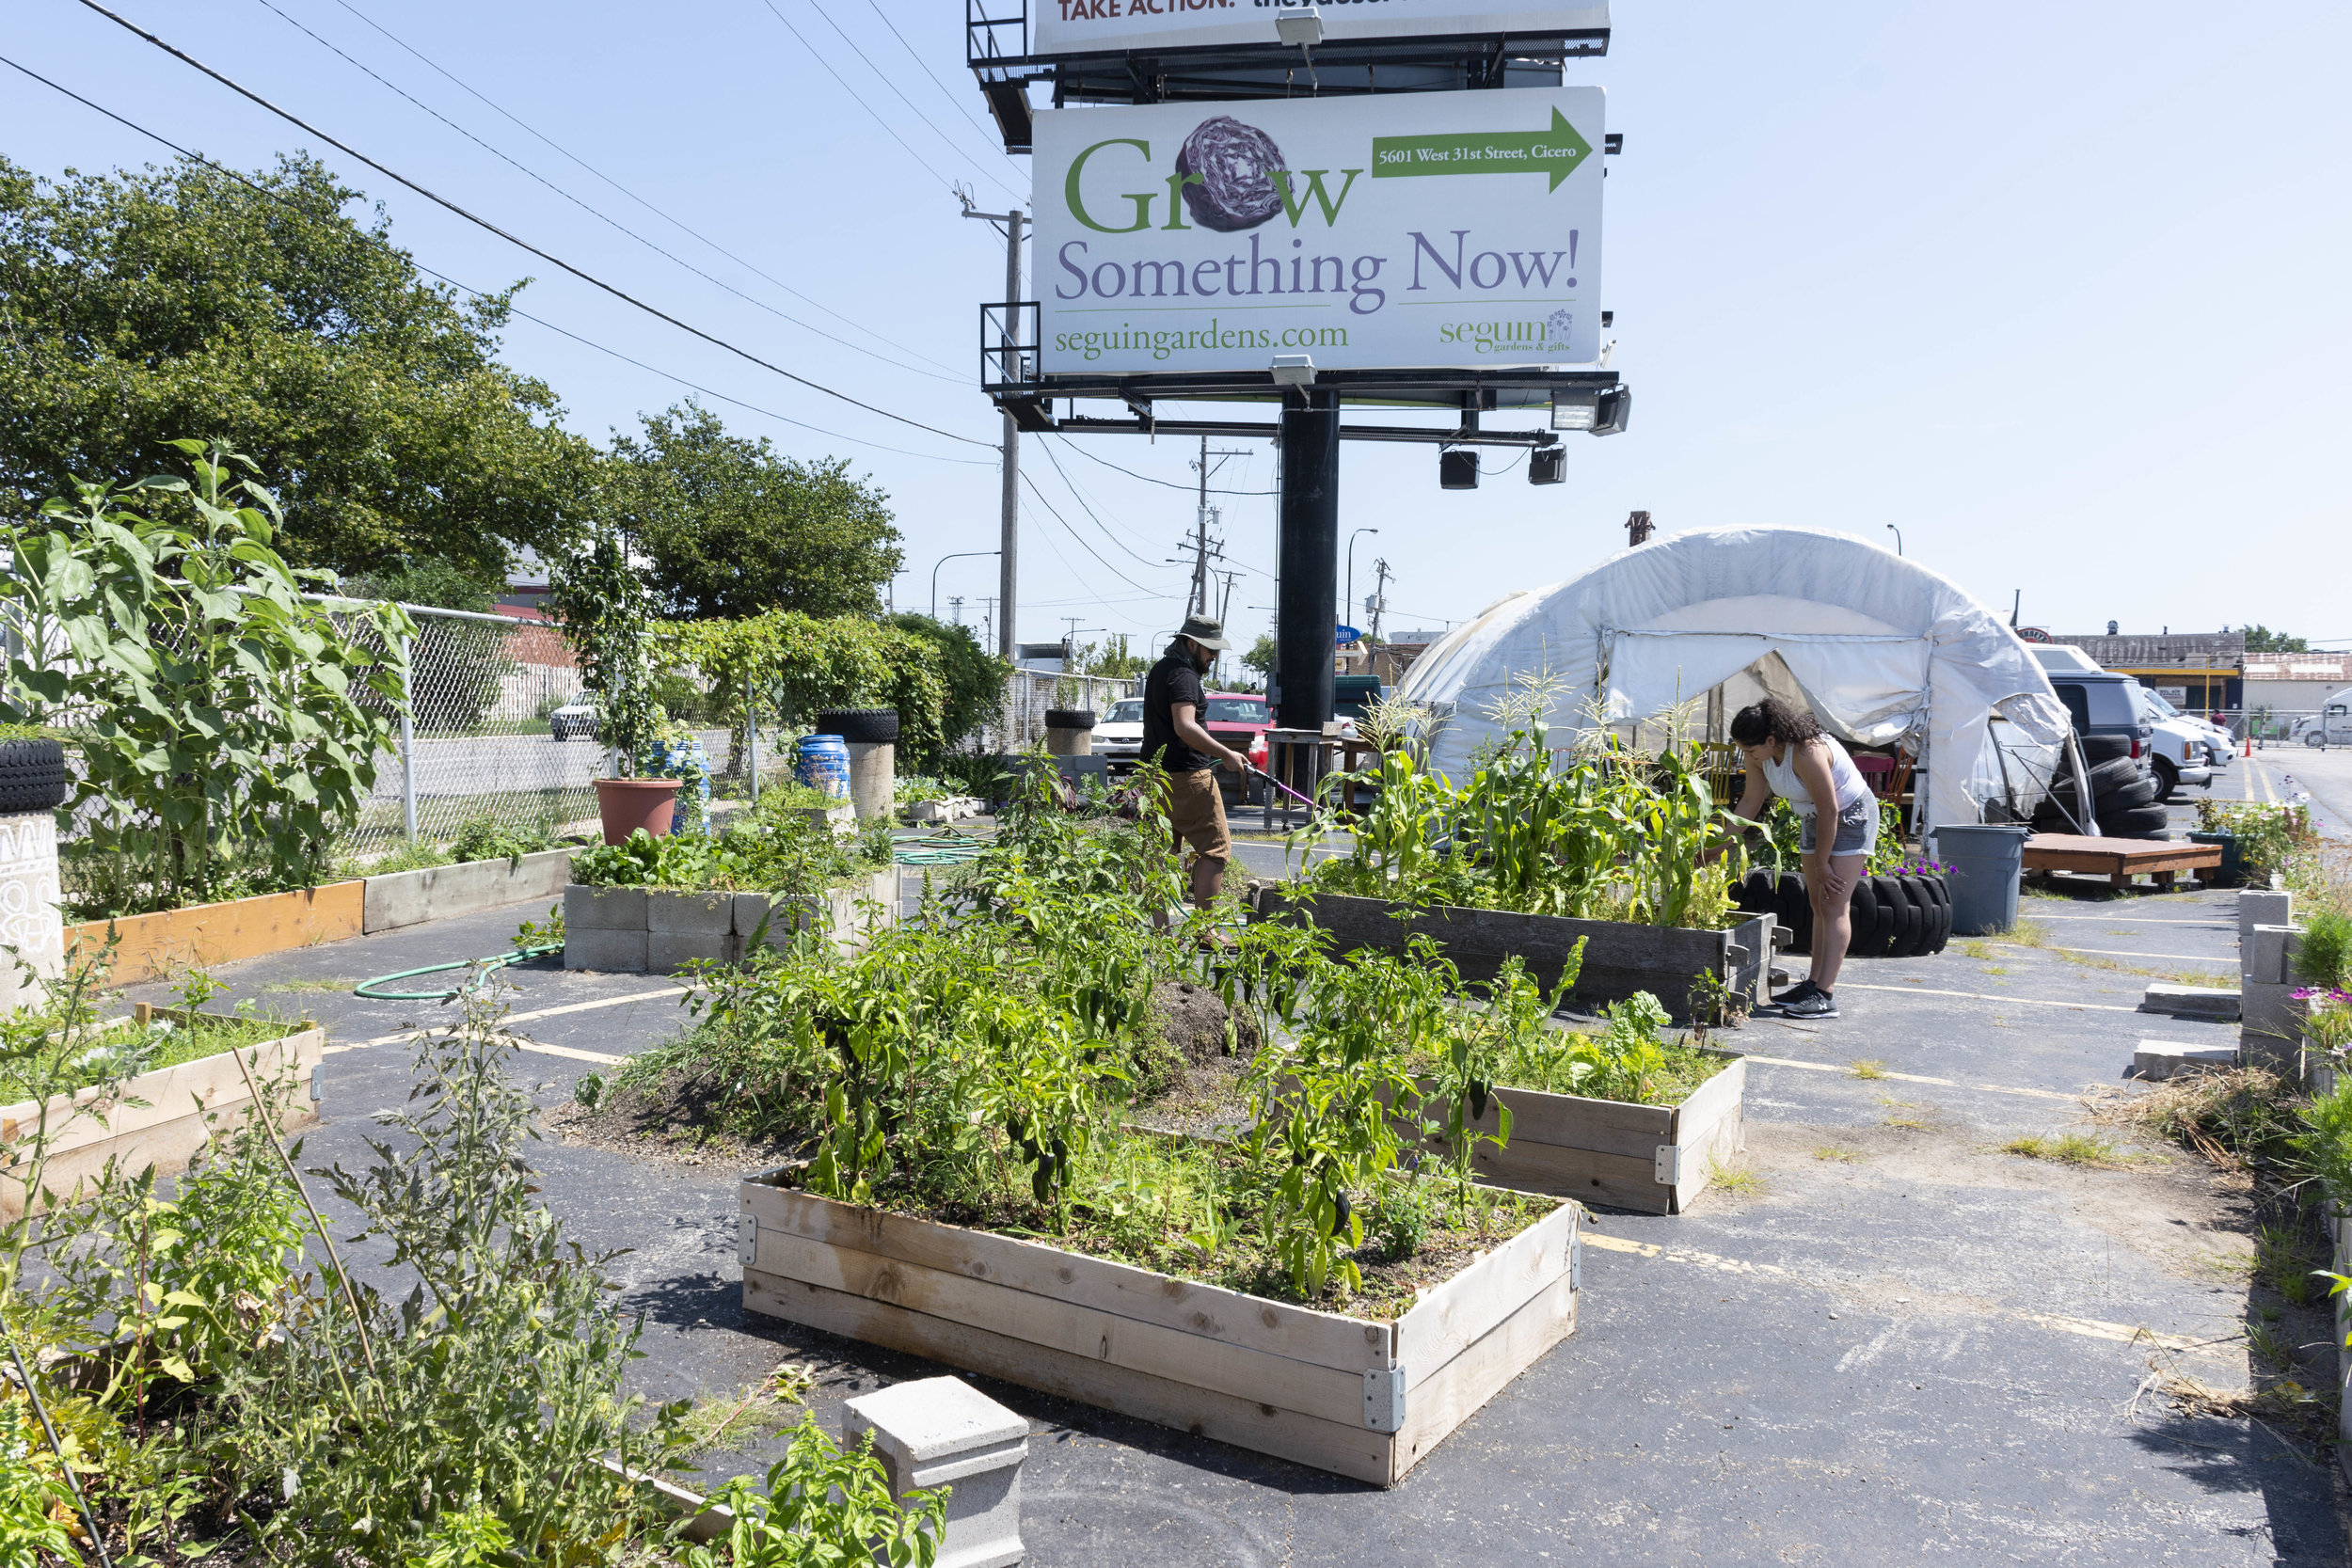  The Cicero Community Farm is a garden run by volunteers that want to create and offer a green space to local residents in Cicero, IL.   